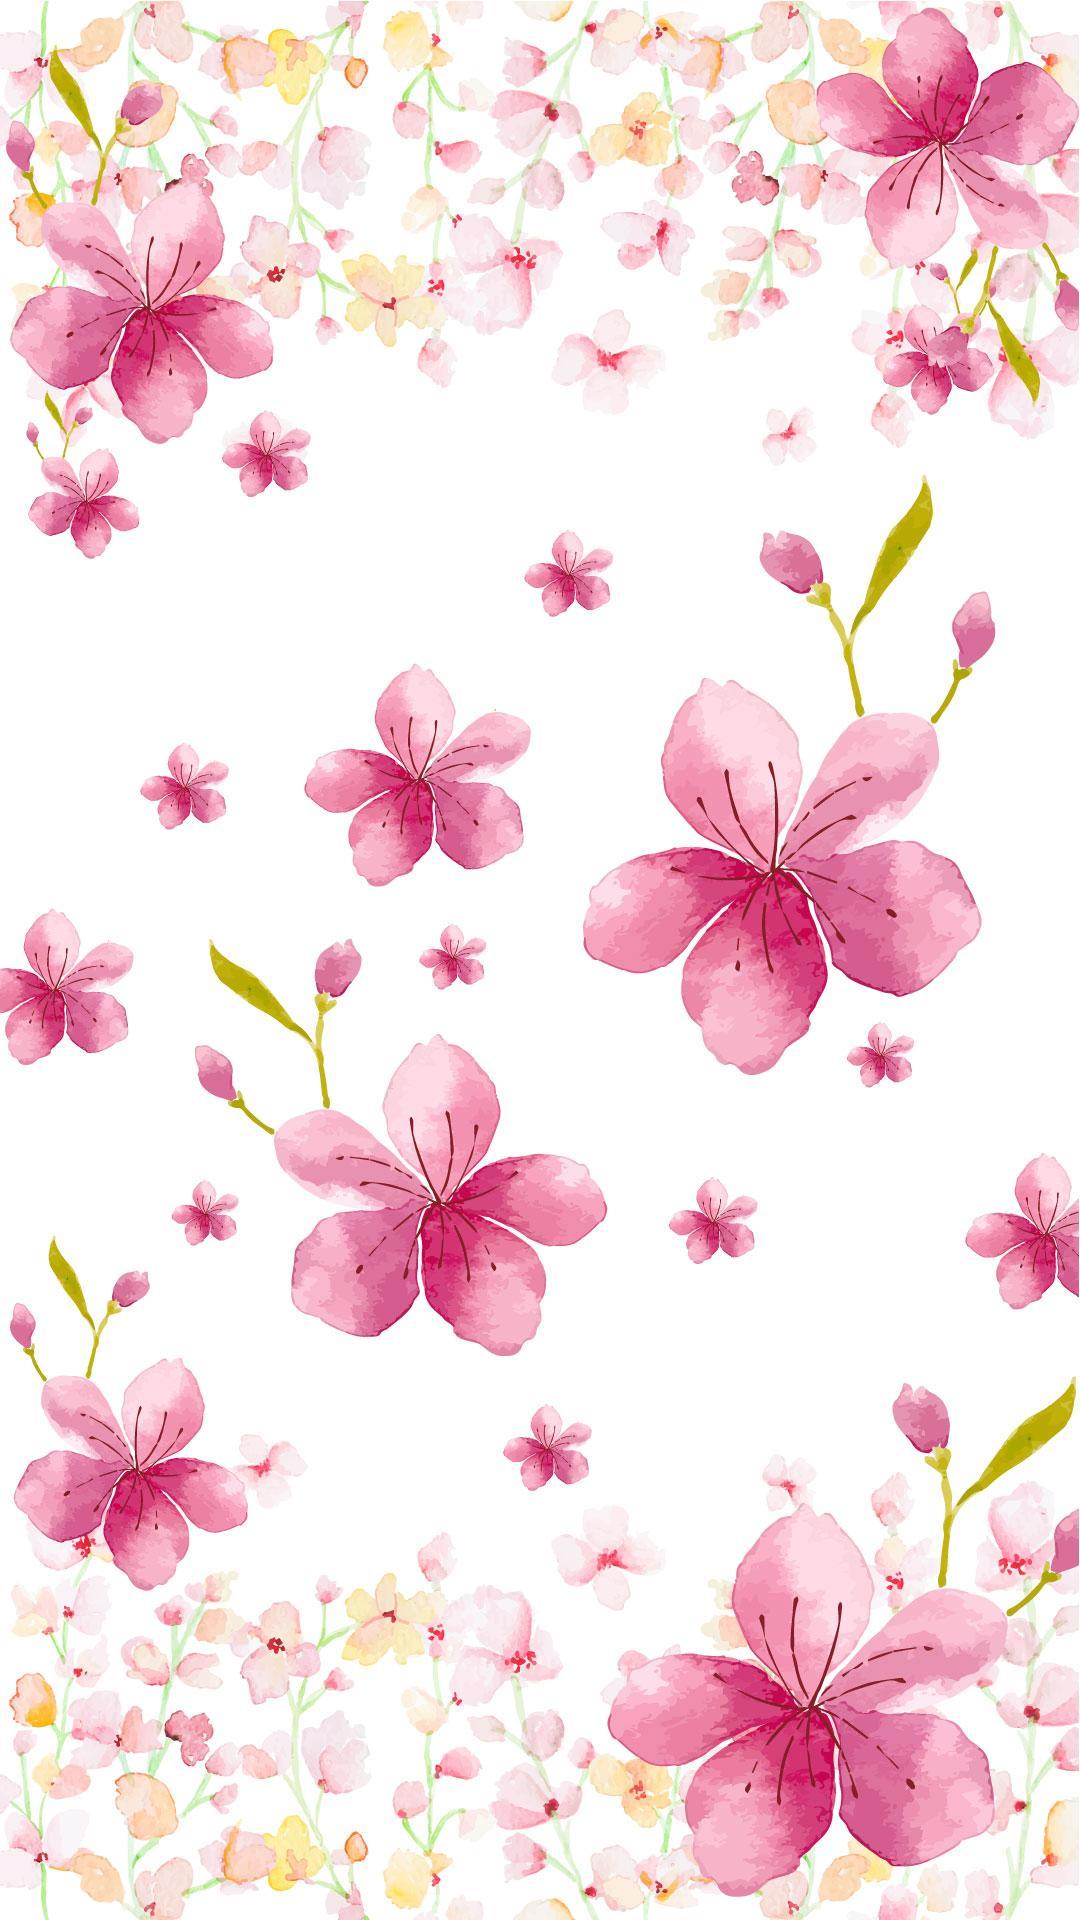 Flower Blooming Live Wallpaper for Android